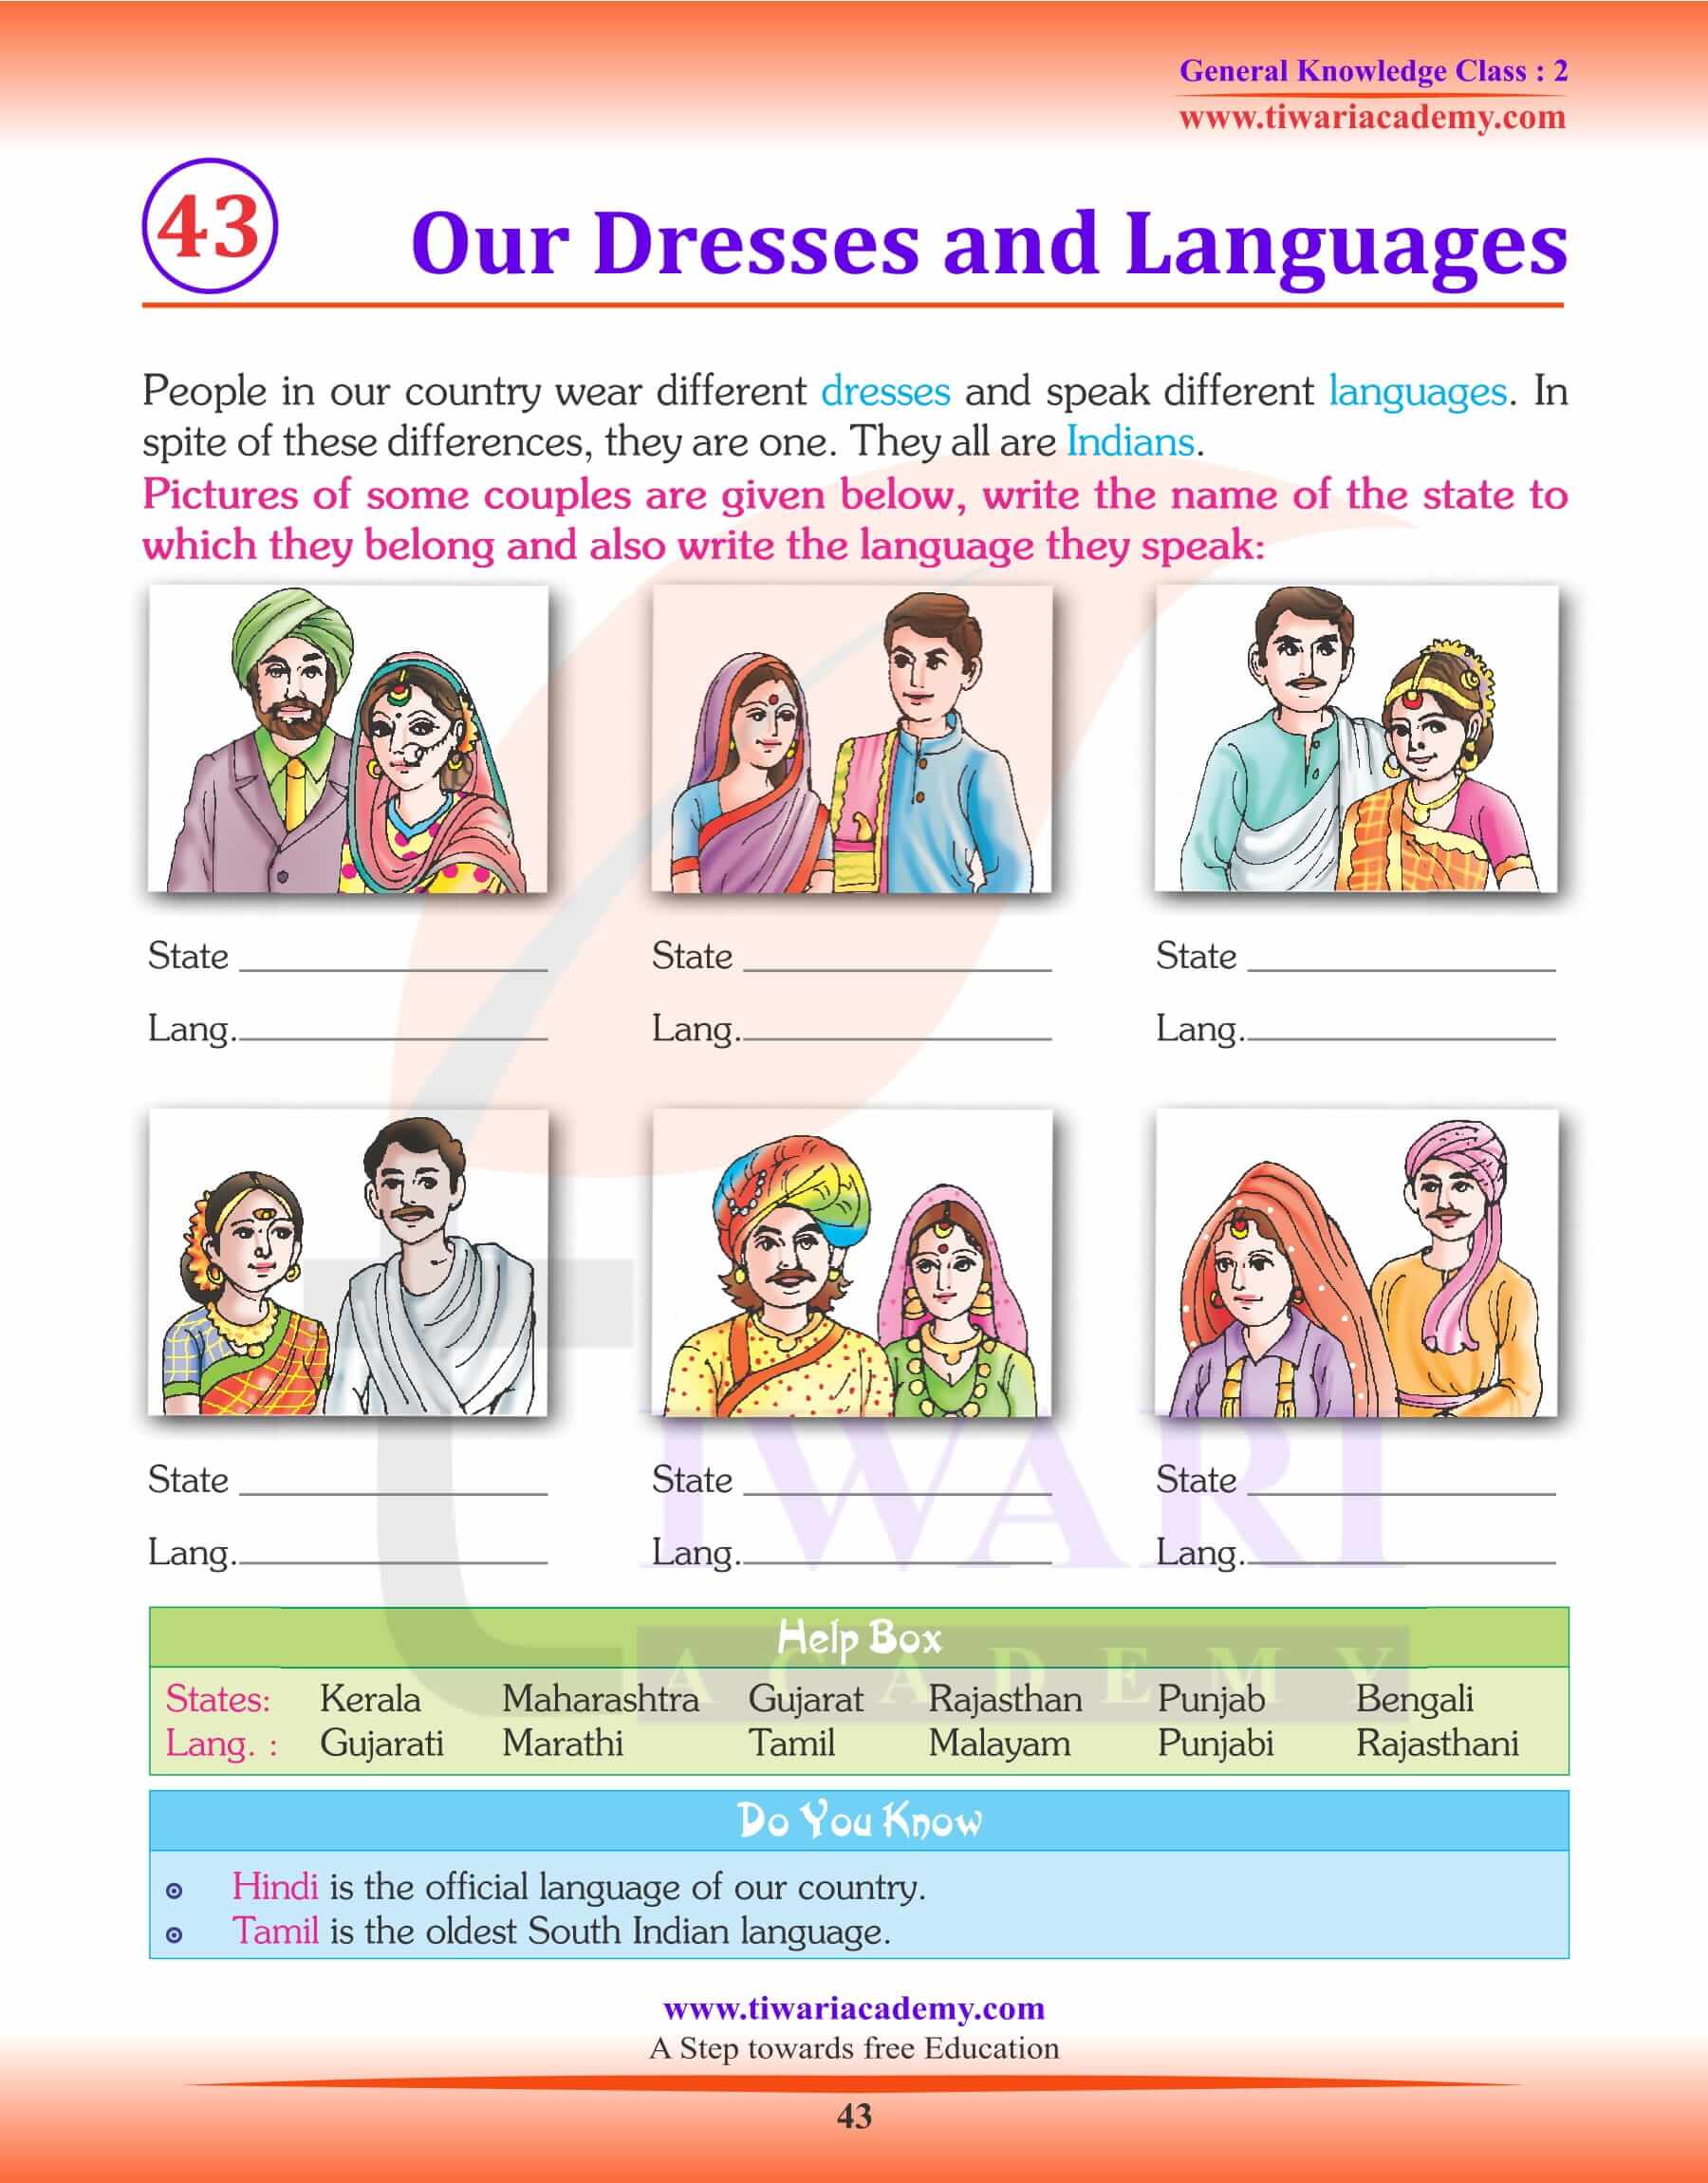 Our Dresses and Languages